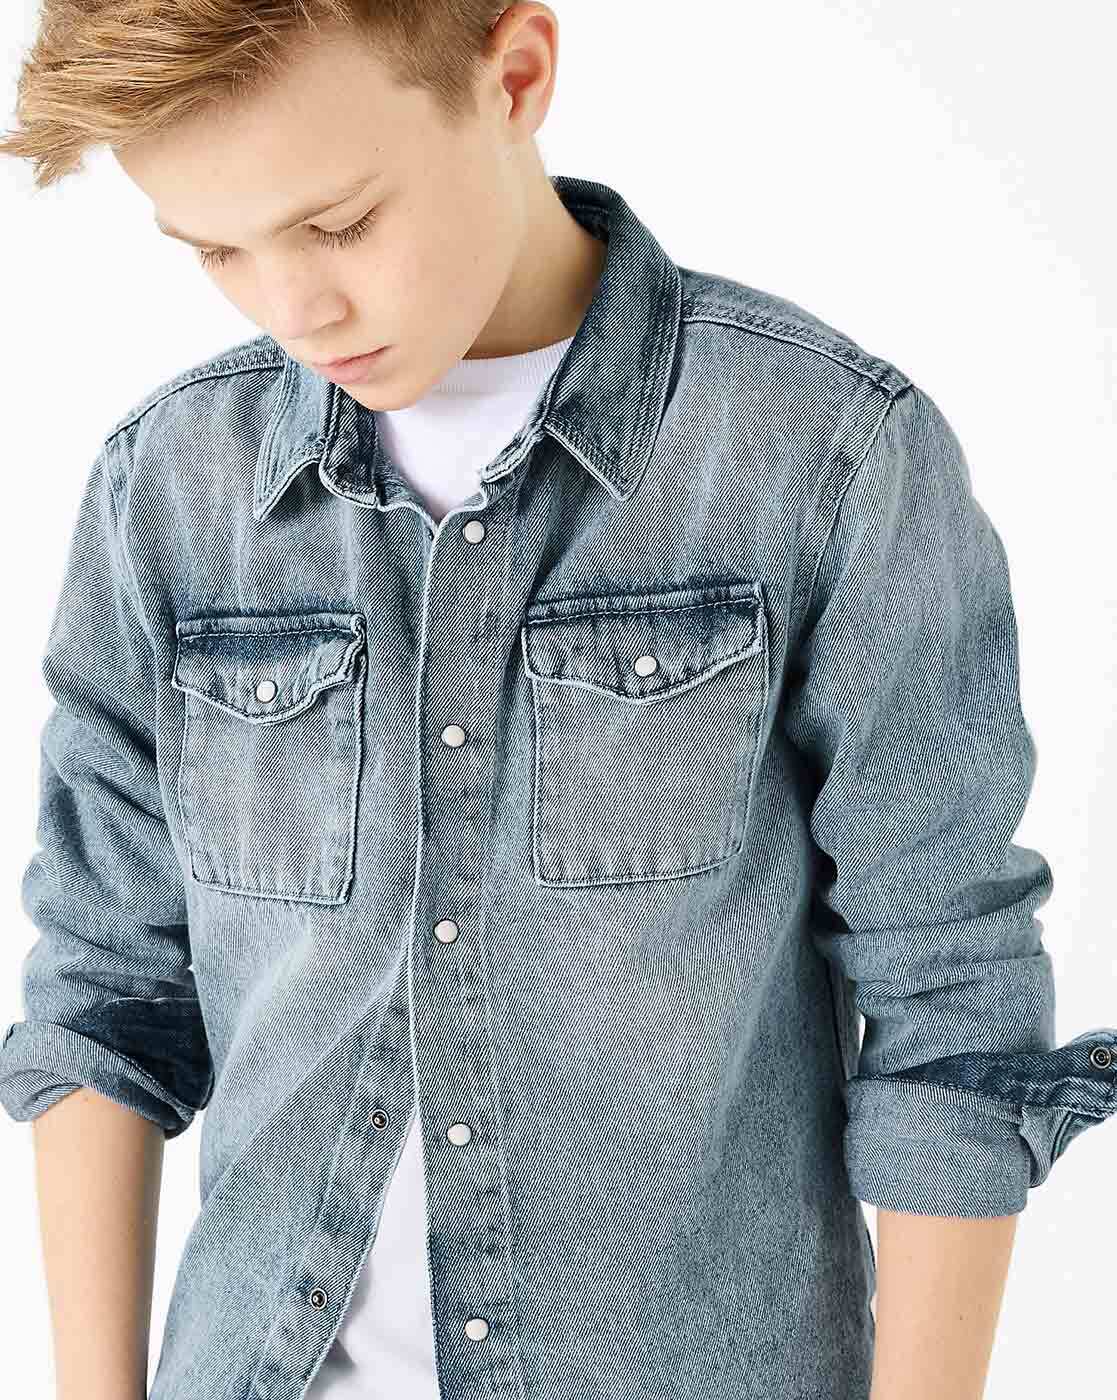 Denim Shirts for Men - Try This 25 Trendy Models For Classy Look